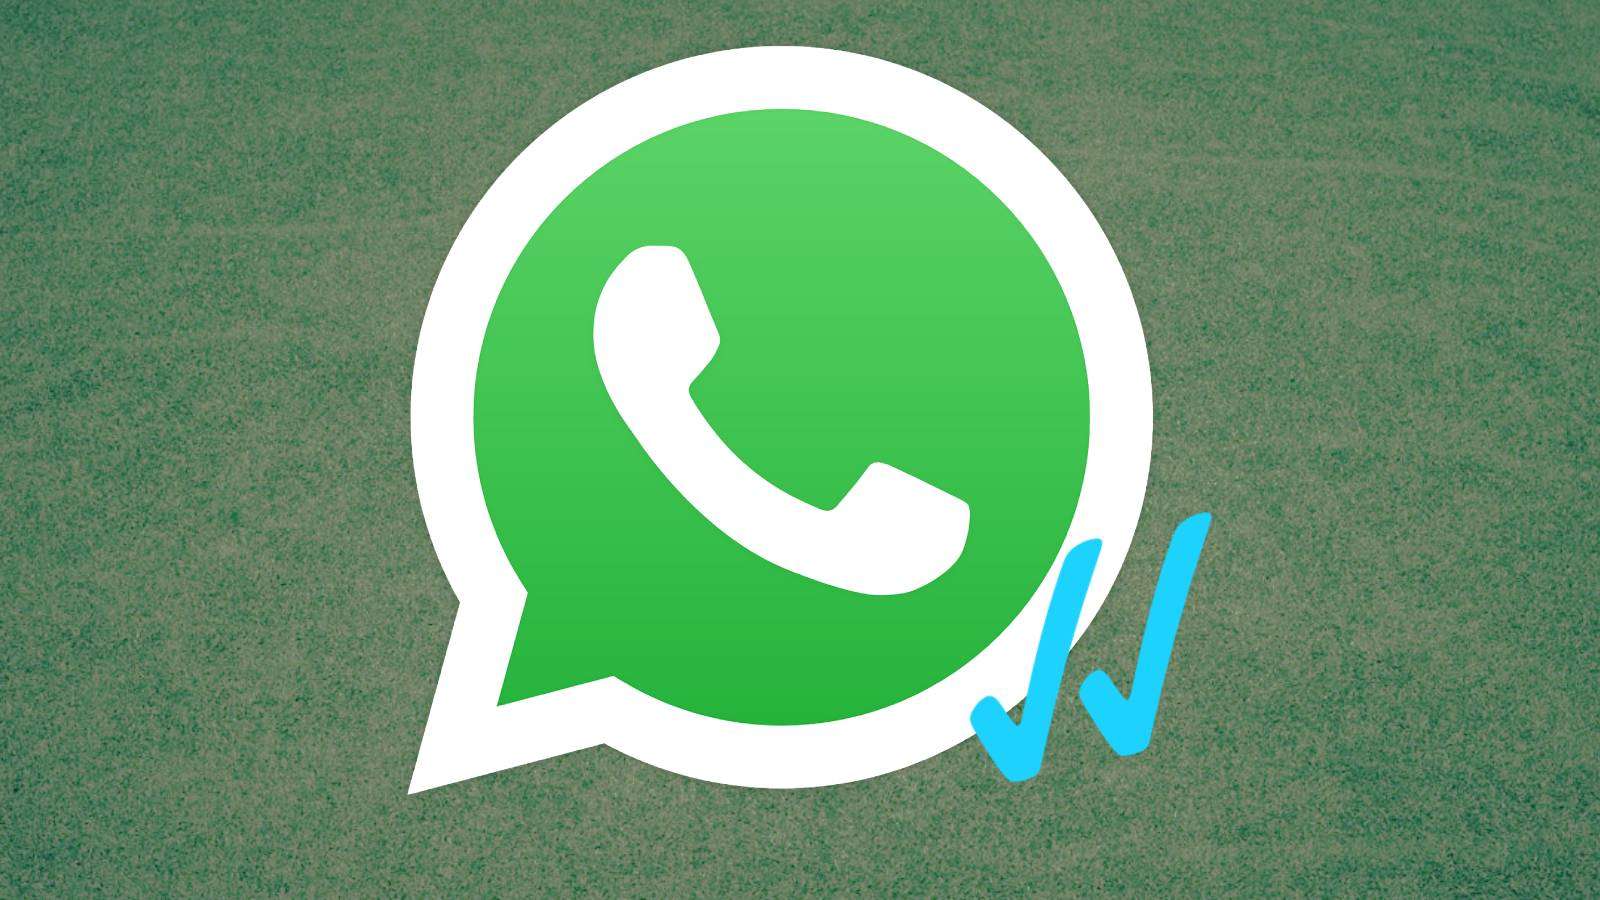 The WhatsApp logo by Danneiva on pixabay, with two blue ticks and the image 'Green Grass' by FWStudio from pexels.com as the background.